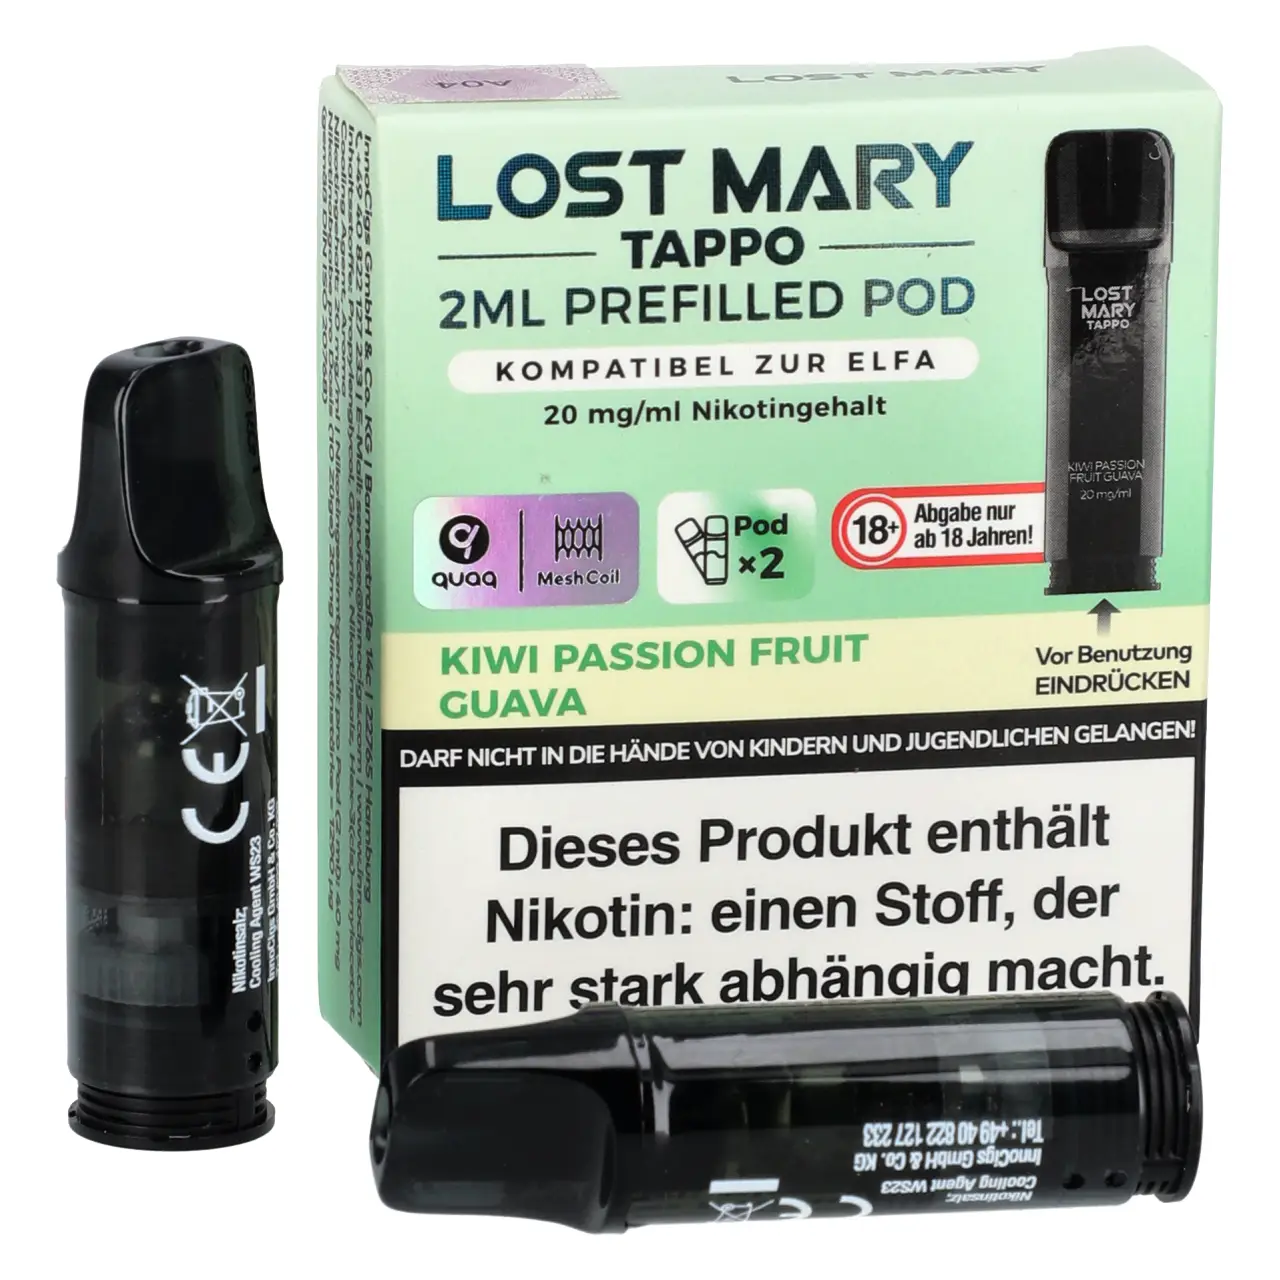 Lost Mary Tappo Prefilled Pod - Kiwi Passion Fruit Guava - 2er Packung